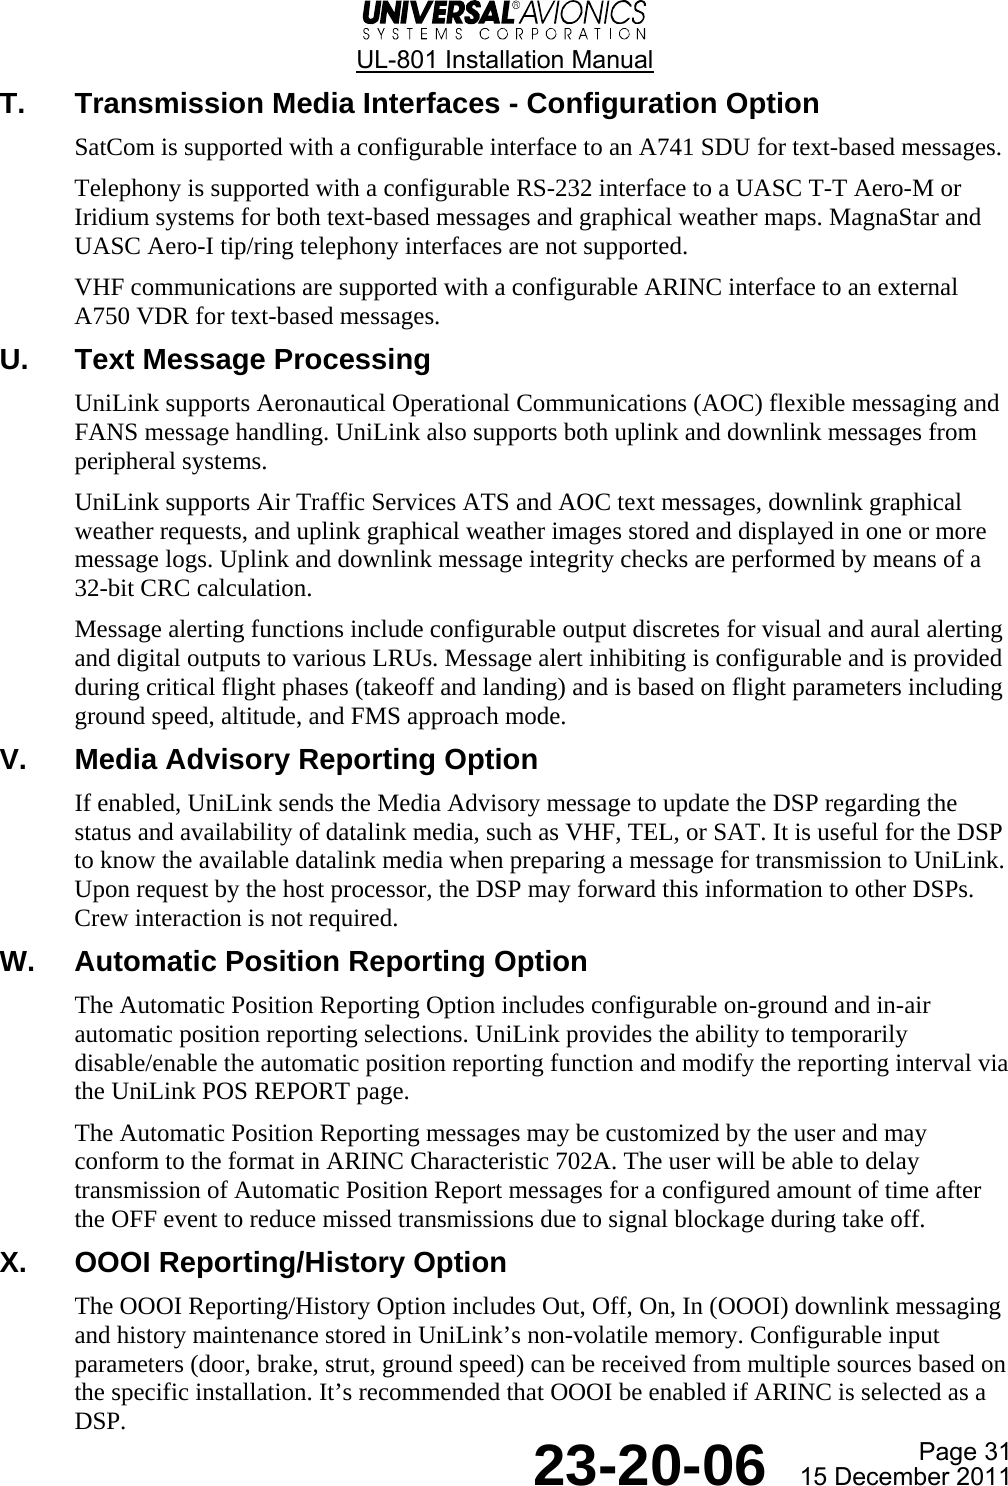  UL-801 Installation Manual  Page 31  23-20-06  15 December 2011 T.  Transmission Media Interfaces - Configuration Option SatCom is supported with a configurable interface to an A741 SDU for text-based messages. Telephony is supported with a configurable RS-232 interface to a UASC T-T Aero-M or Iridium systems for both text-based messages and graphical weather maps. MagnaStar and UASC Aero-I tip/ring telephony interfaces are not supported. VHF communications are supported with a configurable ARINC interface to an external A750 VDR for text-based messages. U.  Text Message Processing UniLink supports Aeronautical Operational Communications (AOC) flexible messaging and FANS message handling. UniLink also supports both uplink and downlink messages from peripheral systems. UniLink supports Air Traffic Services ATS and AOC text messages, downlink graphical weather requests, and uplink graphical weather images stored and displayed in one or more message logs. Uplink and downlink message integrity checks are performed by means of a 32-bit CRC calculation. Message alerting functions include configurable output discretes for visual and aural alerting and digital outputs to various LRUs. Message alert inhibiting is configurable and is provided during critical flight phases (takeoff and landing) and is based on flight parameters including ground speed, altitude, and FMS approach mode. V.  Media Advisory Reporting Option If enabled, UniLink sends the Media Advisory message to update the DSP regarding the status and availability of datalink media, such as VHF, TEL, or SAT. It is useful for the DSP to know the available datalink media when preparing a message for transmission to UniLink. Upon request by the host processor, the DSP may forward this information to other DSPs. Crew interaction is not required. W.  Automatic Position Reporting Option The Automatic Position Reporting Option includes configurable on-ground and in-air automatic position reporting selections. UniLink provides the ability to temporarily disable/enable the automatic position reporting function and modify the reporting interval via the UniLink POS REPORT page. The Automatic Position Reporting messages may be customized by the user and may conform to the format in ARINC Characteristic 702A. The user will be able to delay transmission of Automatic Position Report messages for a configured amount of time after the OFF event to reduce missed transmissions due to signal blockage during take off. X.  OOOI Reporting/History Option The OOOI Reporting/History Option includes Out, Off, On, In (OOOI) downlink messaging and history maintenance stored in UniLink’s non-volatile memory. Configurable input parameters (door, brake, strut, ground speed) can be received from multiple sources based on the specific installation. It’s recommended that OOOI be enabled if ARINC is selected as a DSP. 